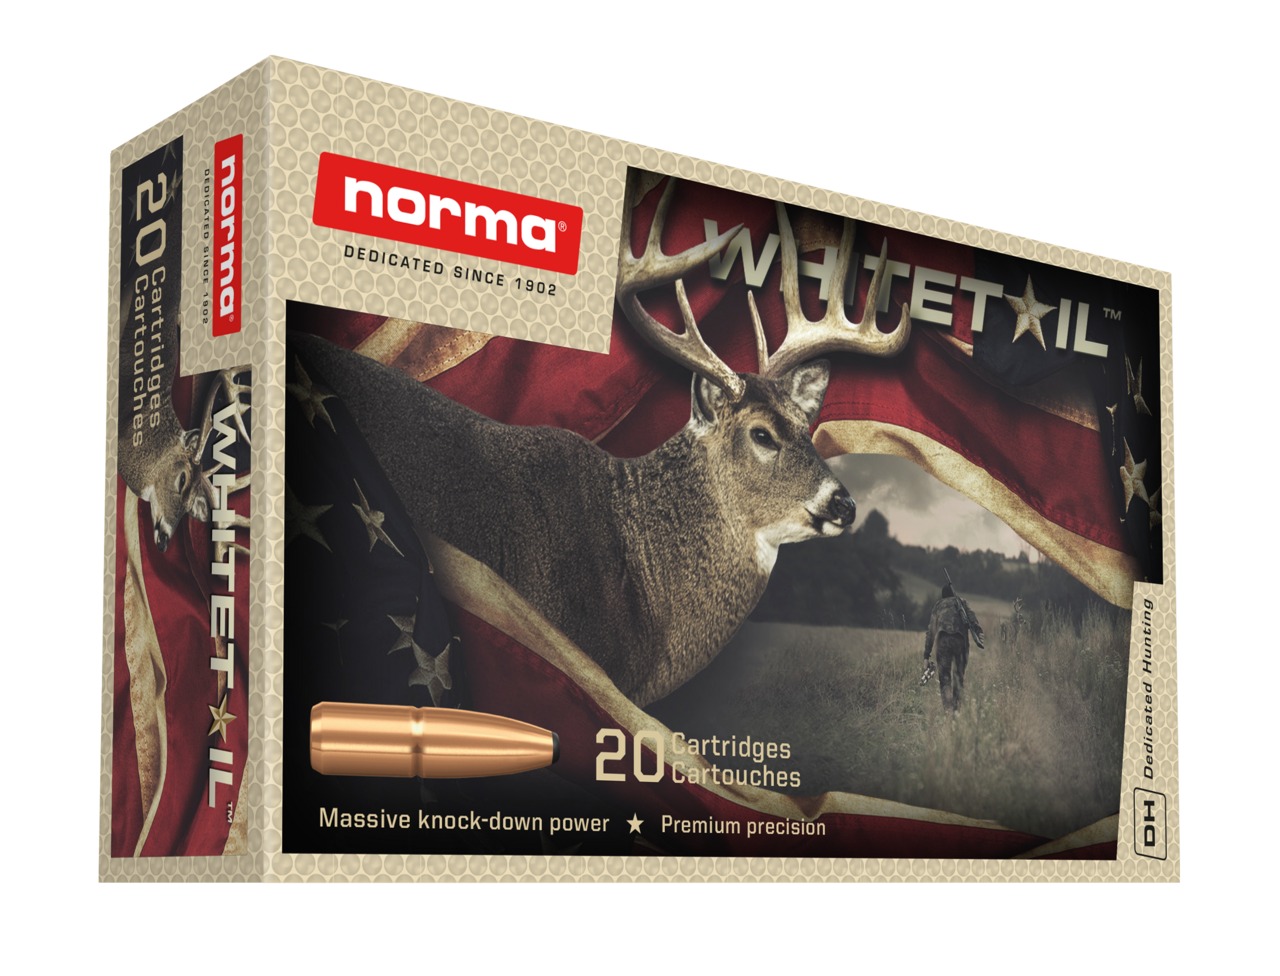 CART NORMA .308WIN 150GR WHITETAIL BTE 20 ref 20177382 NORMA